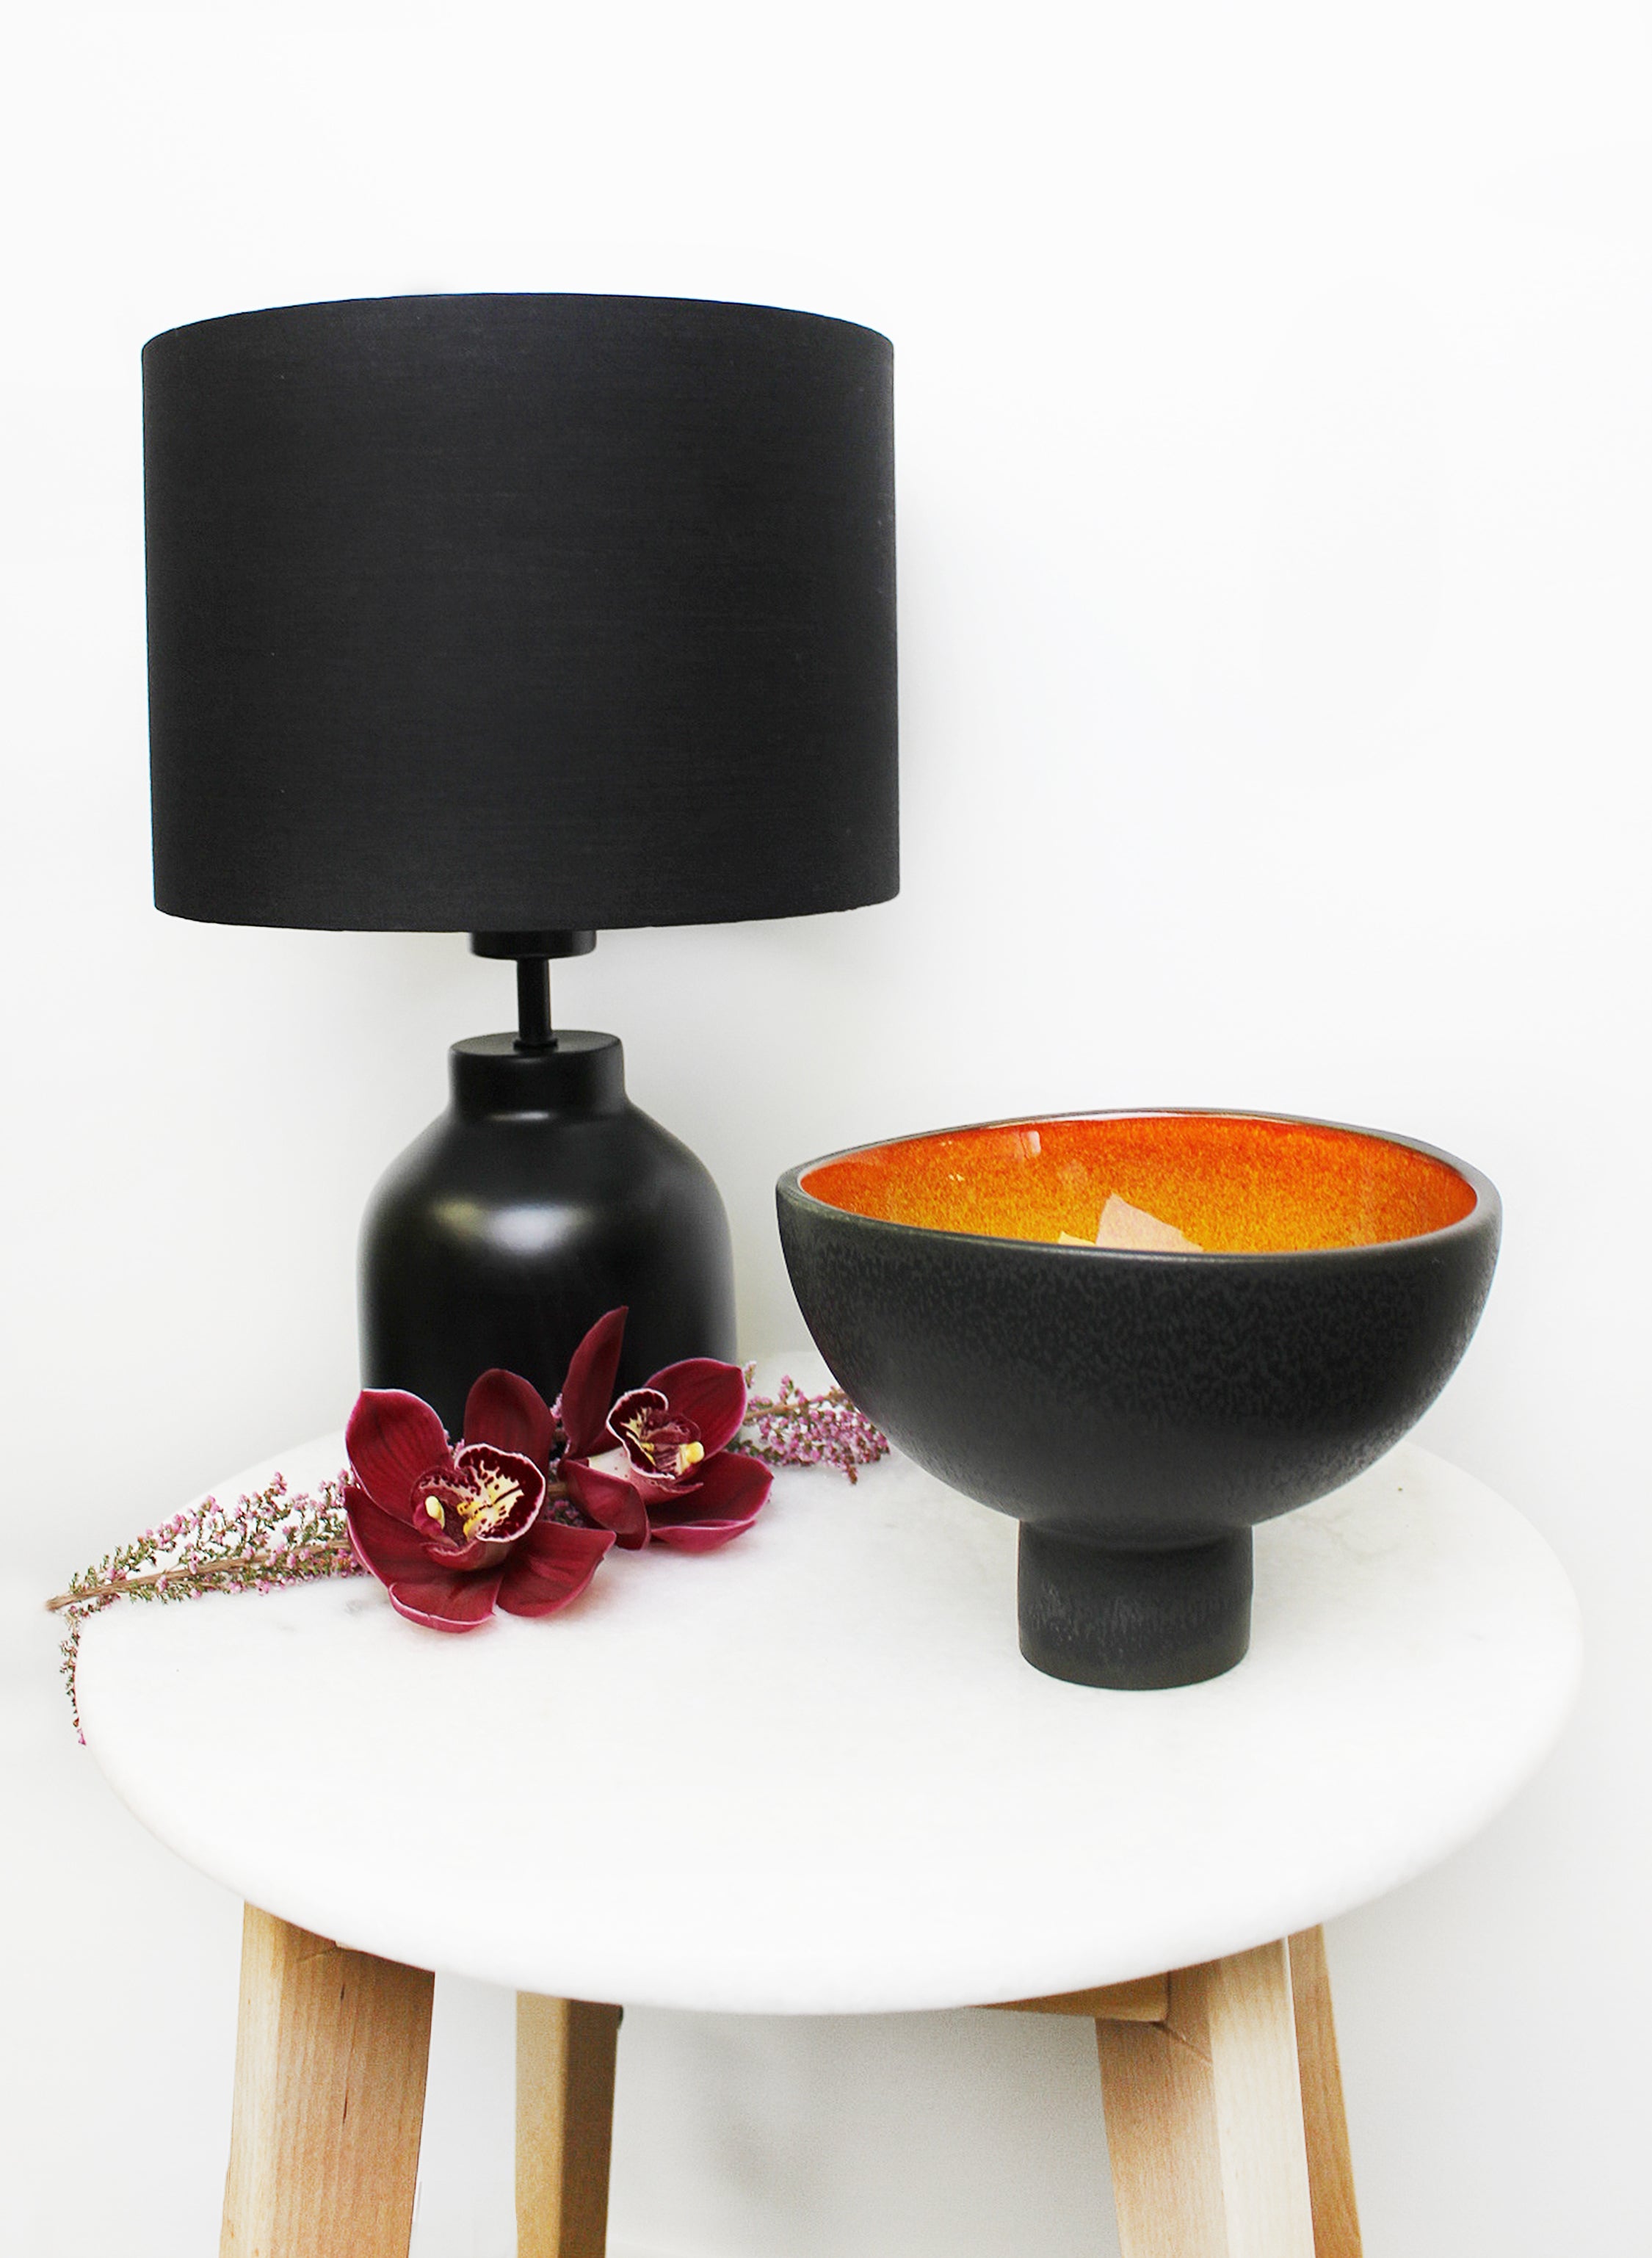 Flame Bowl - Small